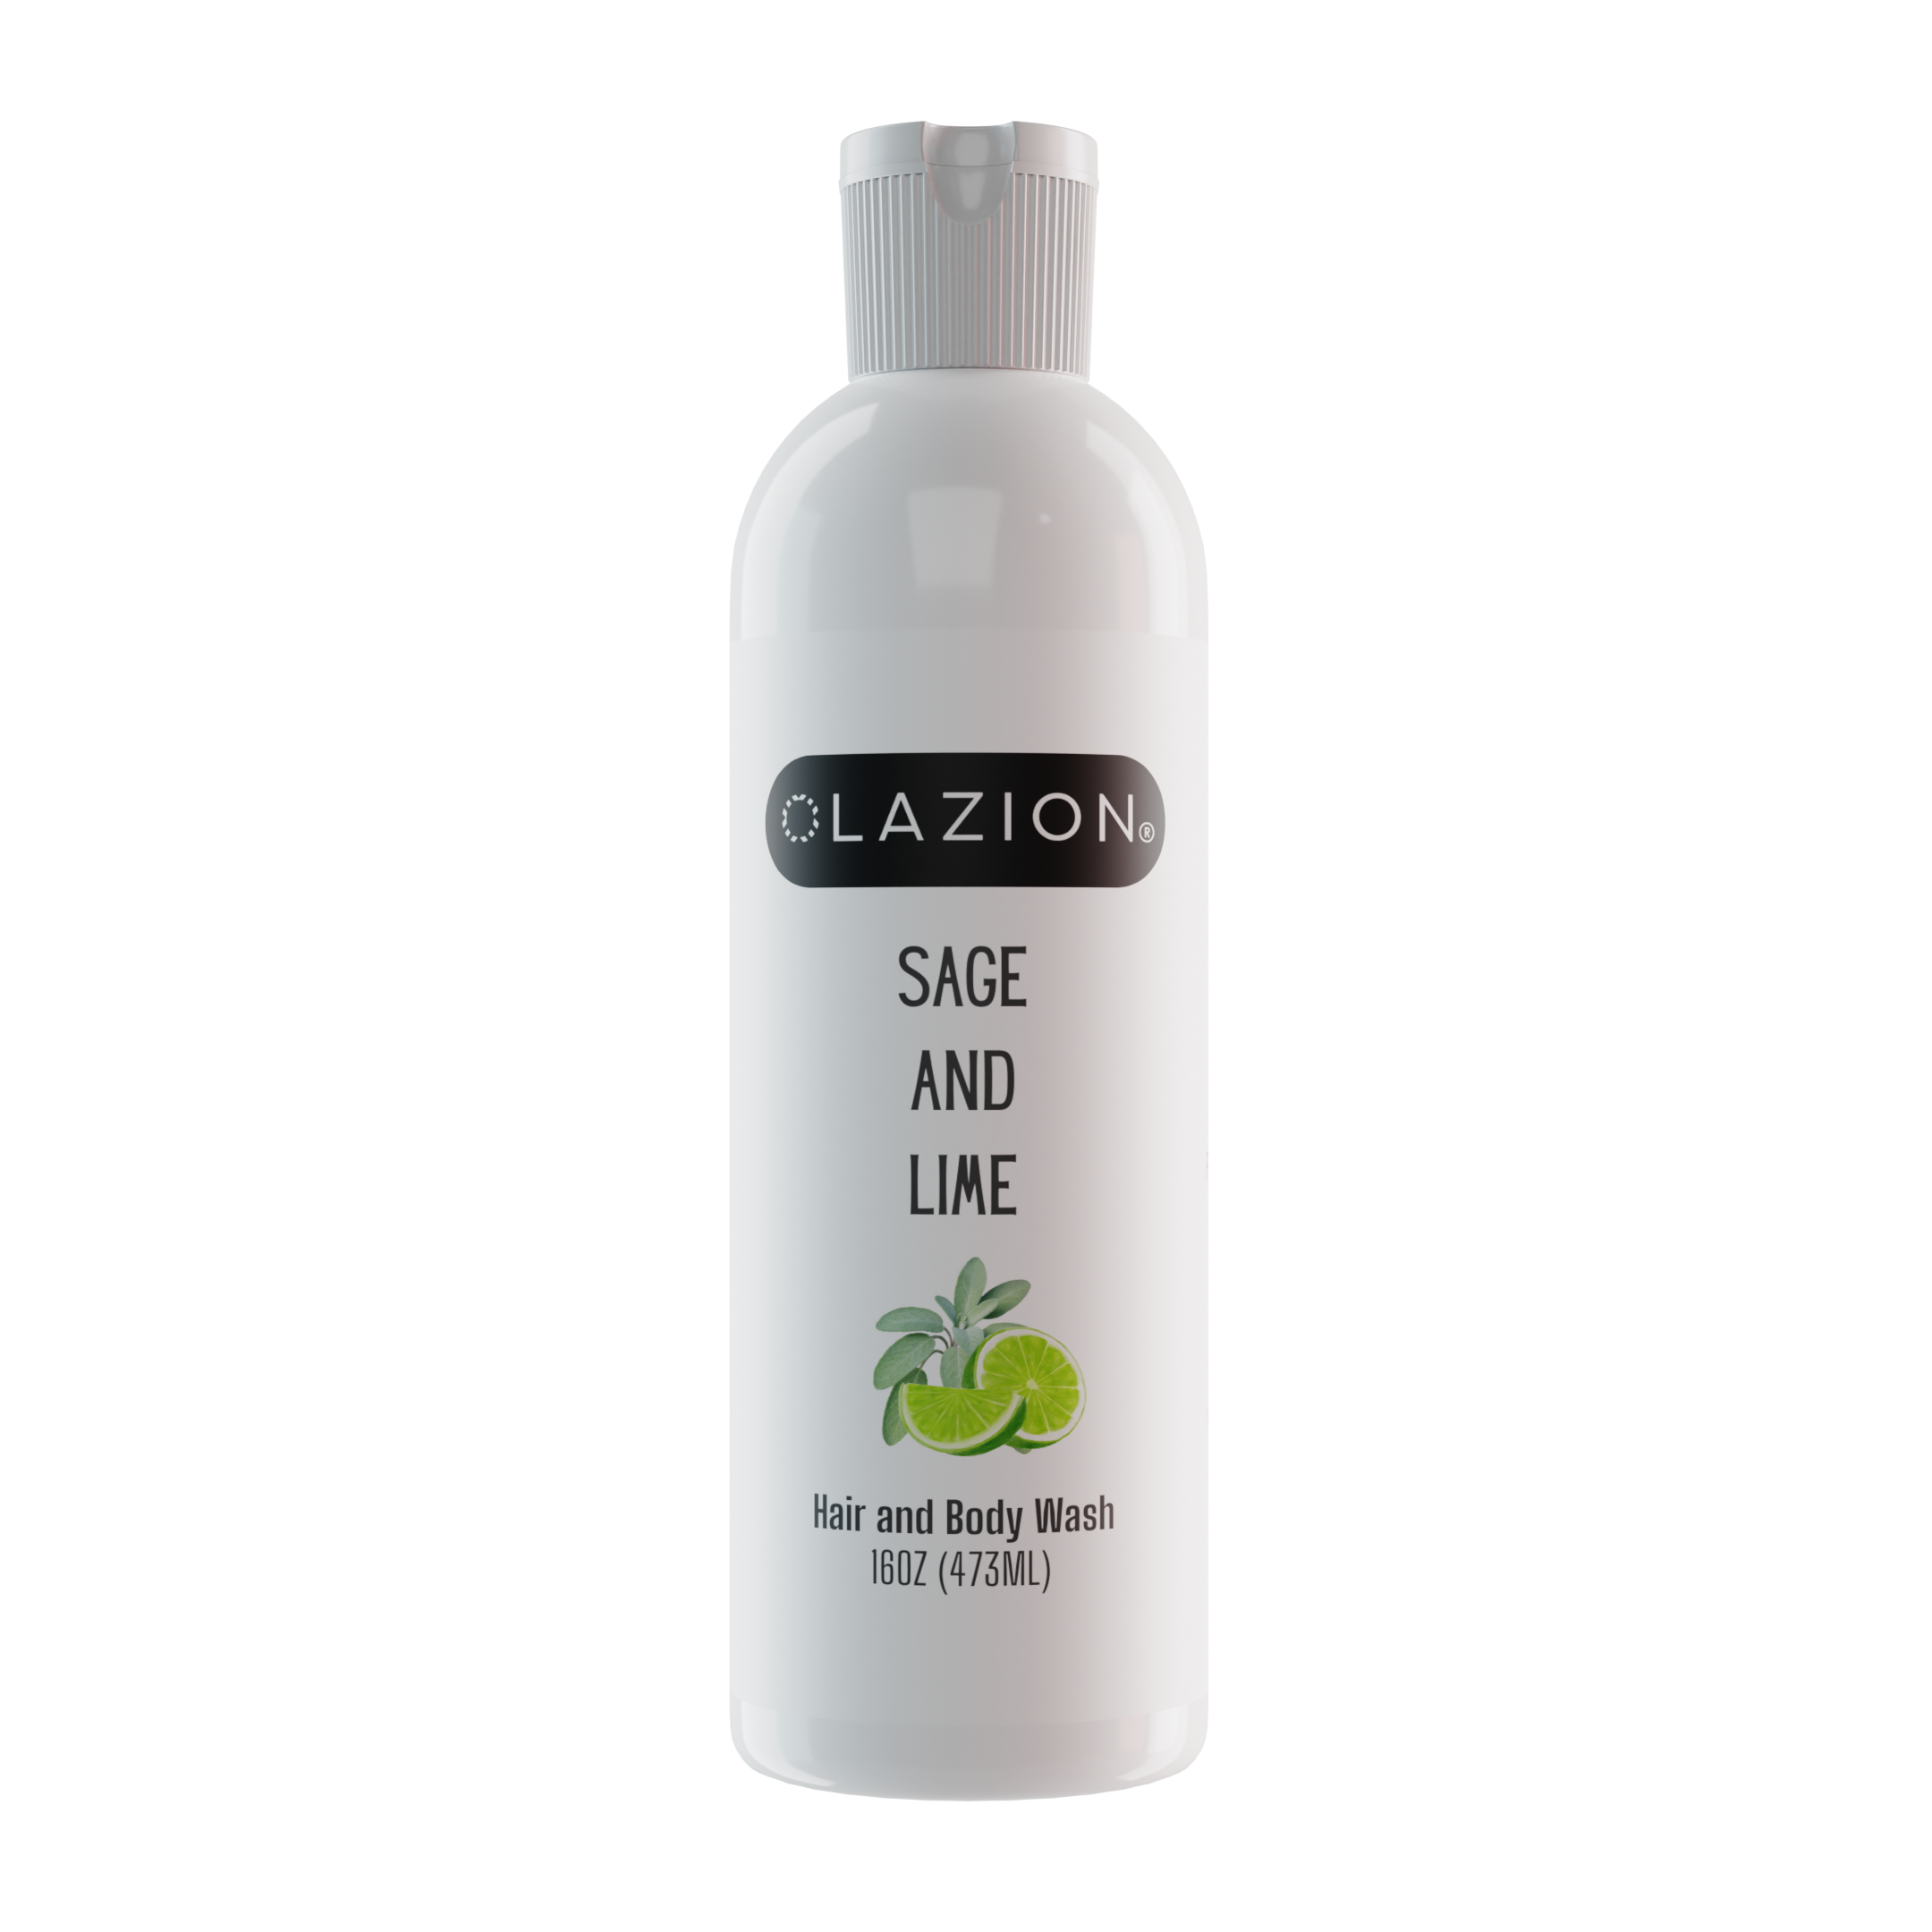 Sage and Lime All Natural "Vegan" Body Wash